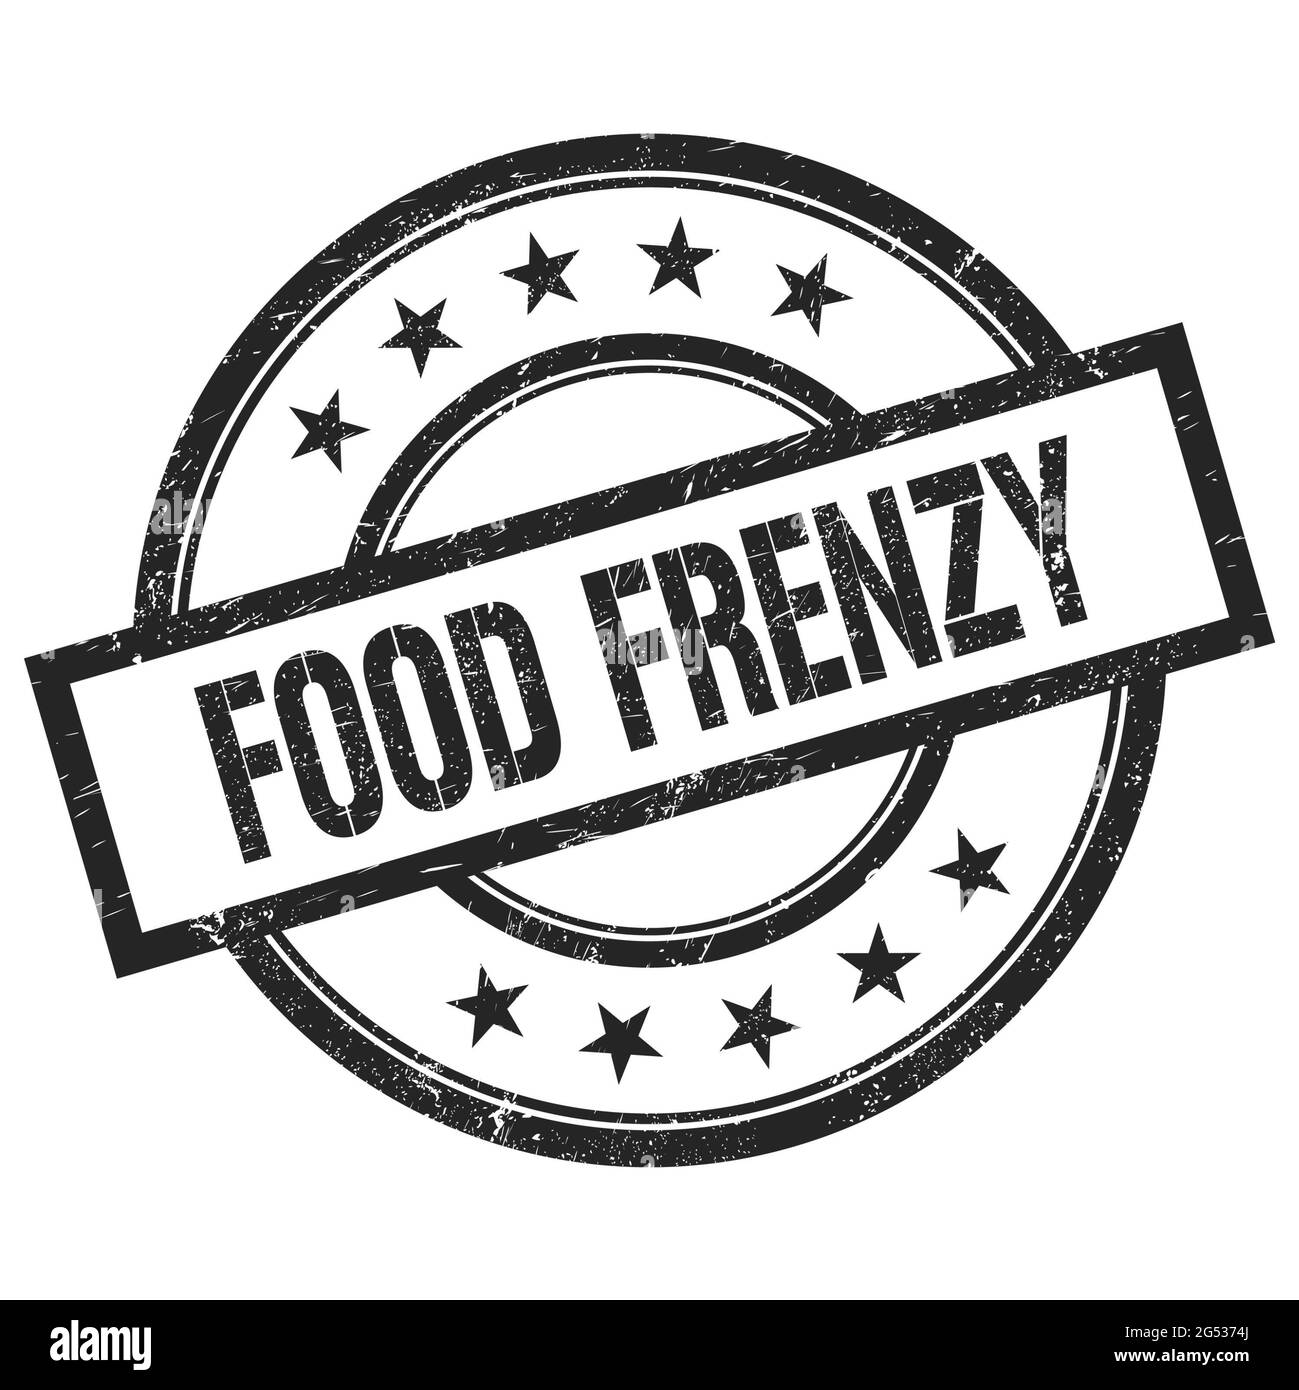 FOOD FRENZY text written on black round vintage rubber stamp. Stock Photo